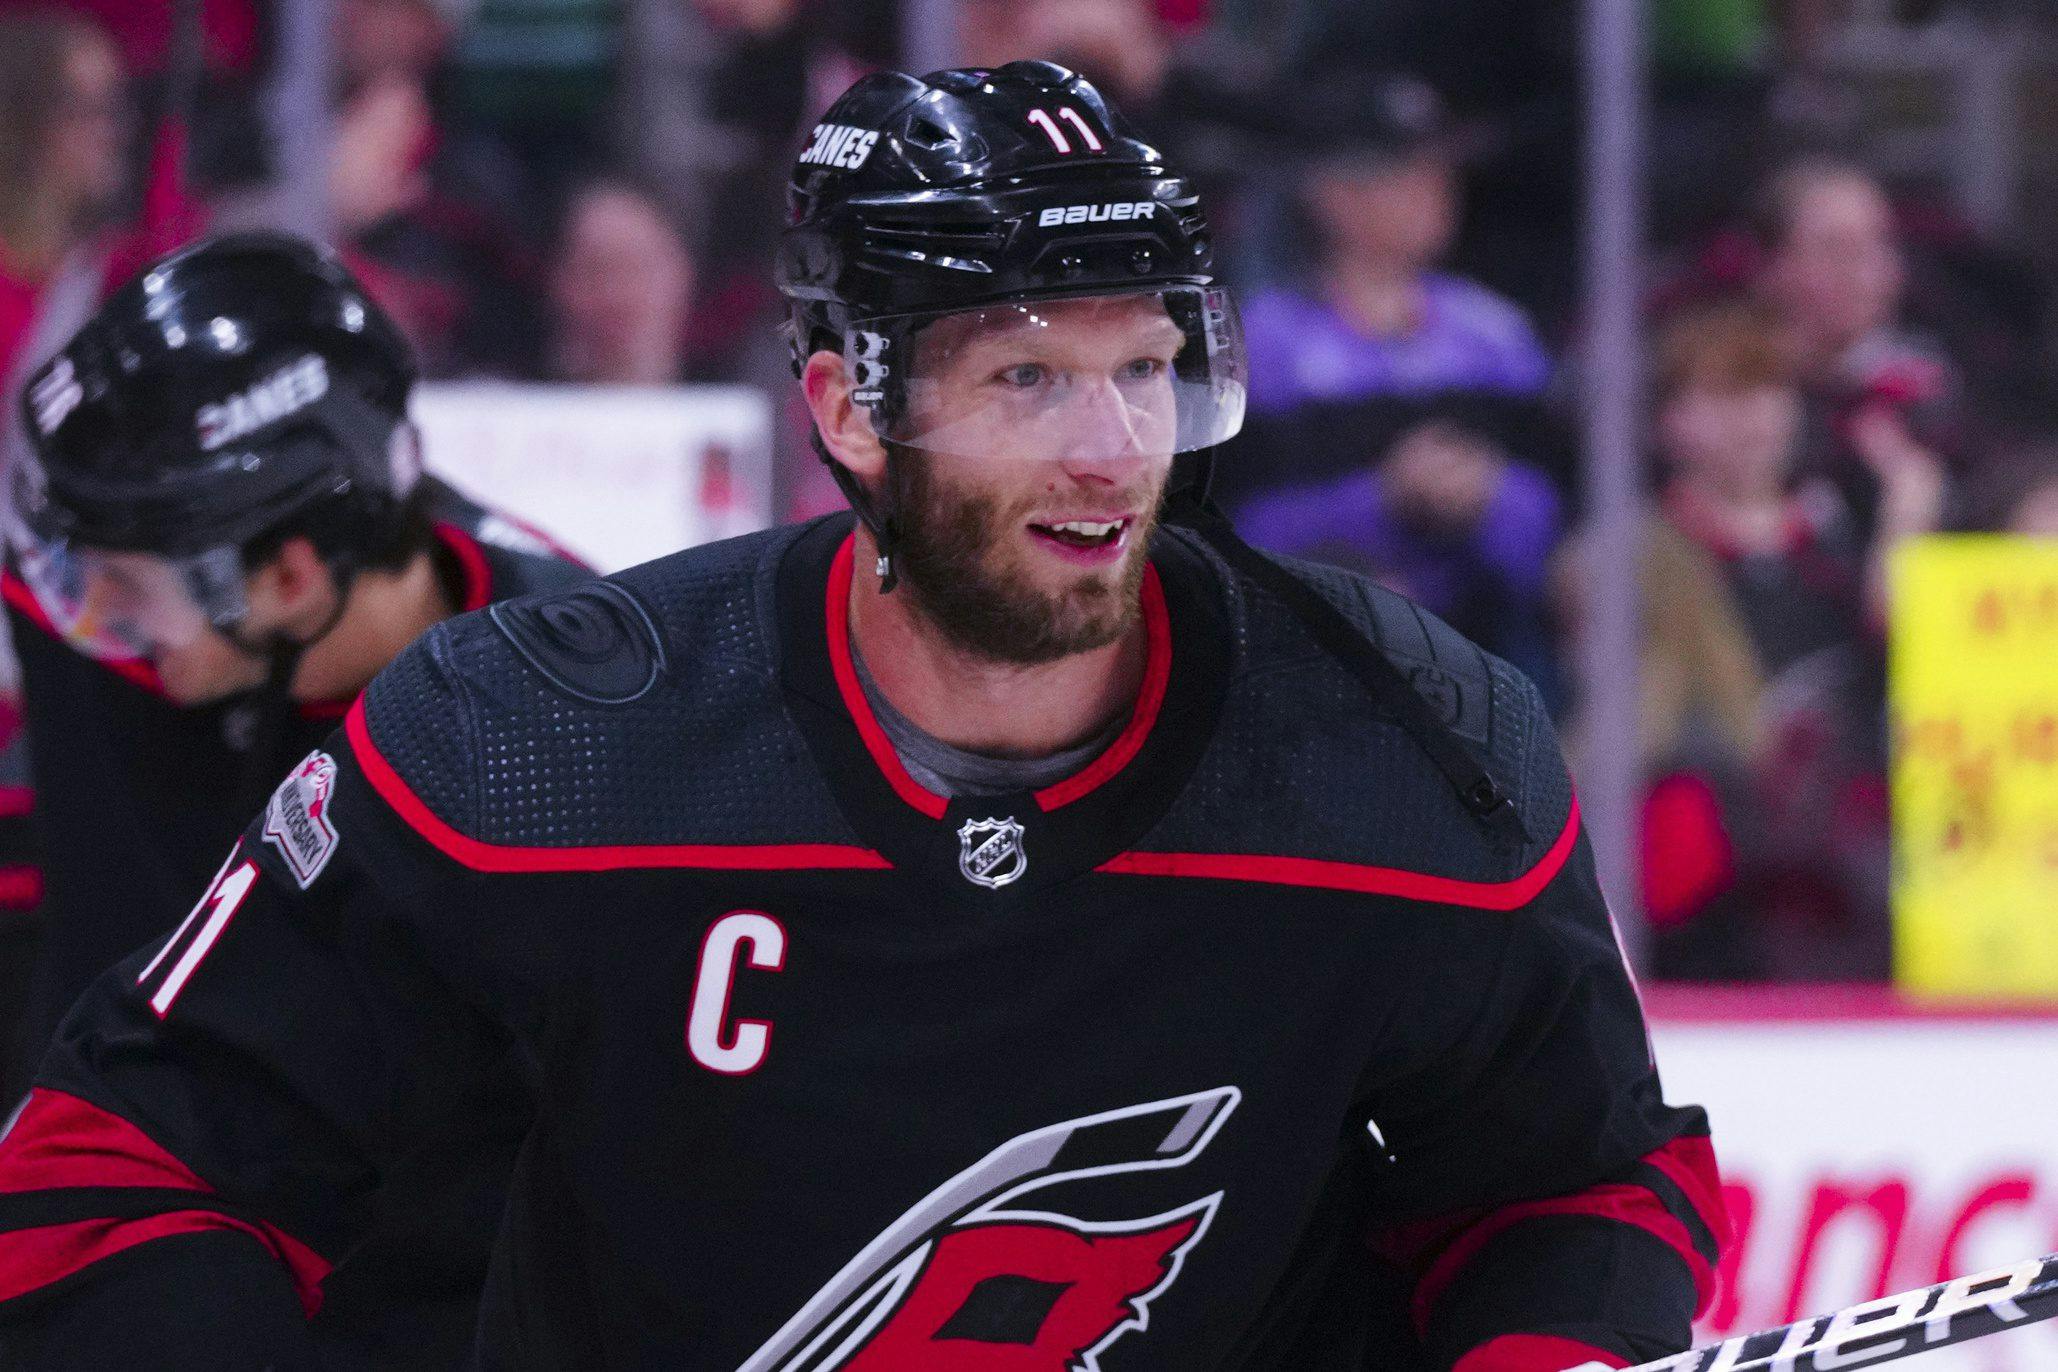 Carolina Hurricanes sign Jordan Staal to a four-year contract with $2.9 million AAV